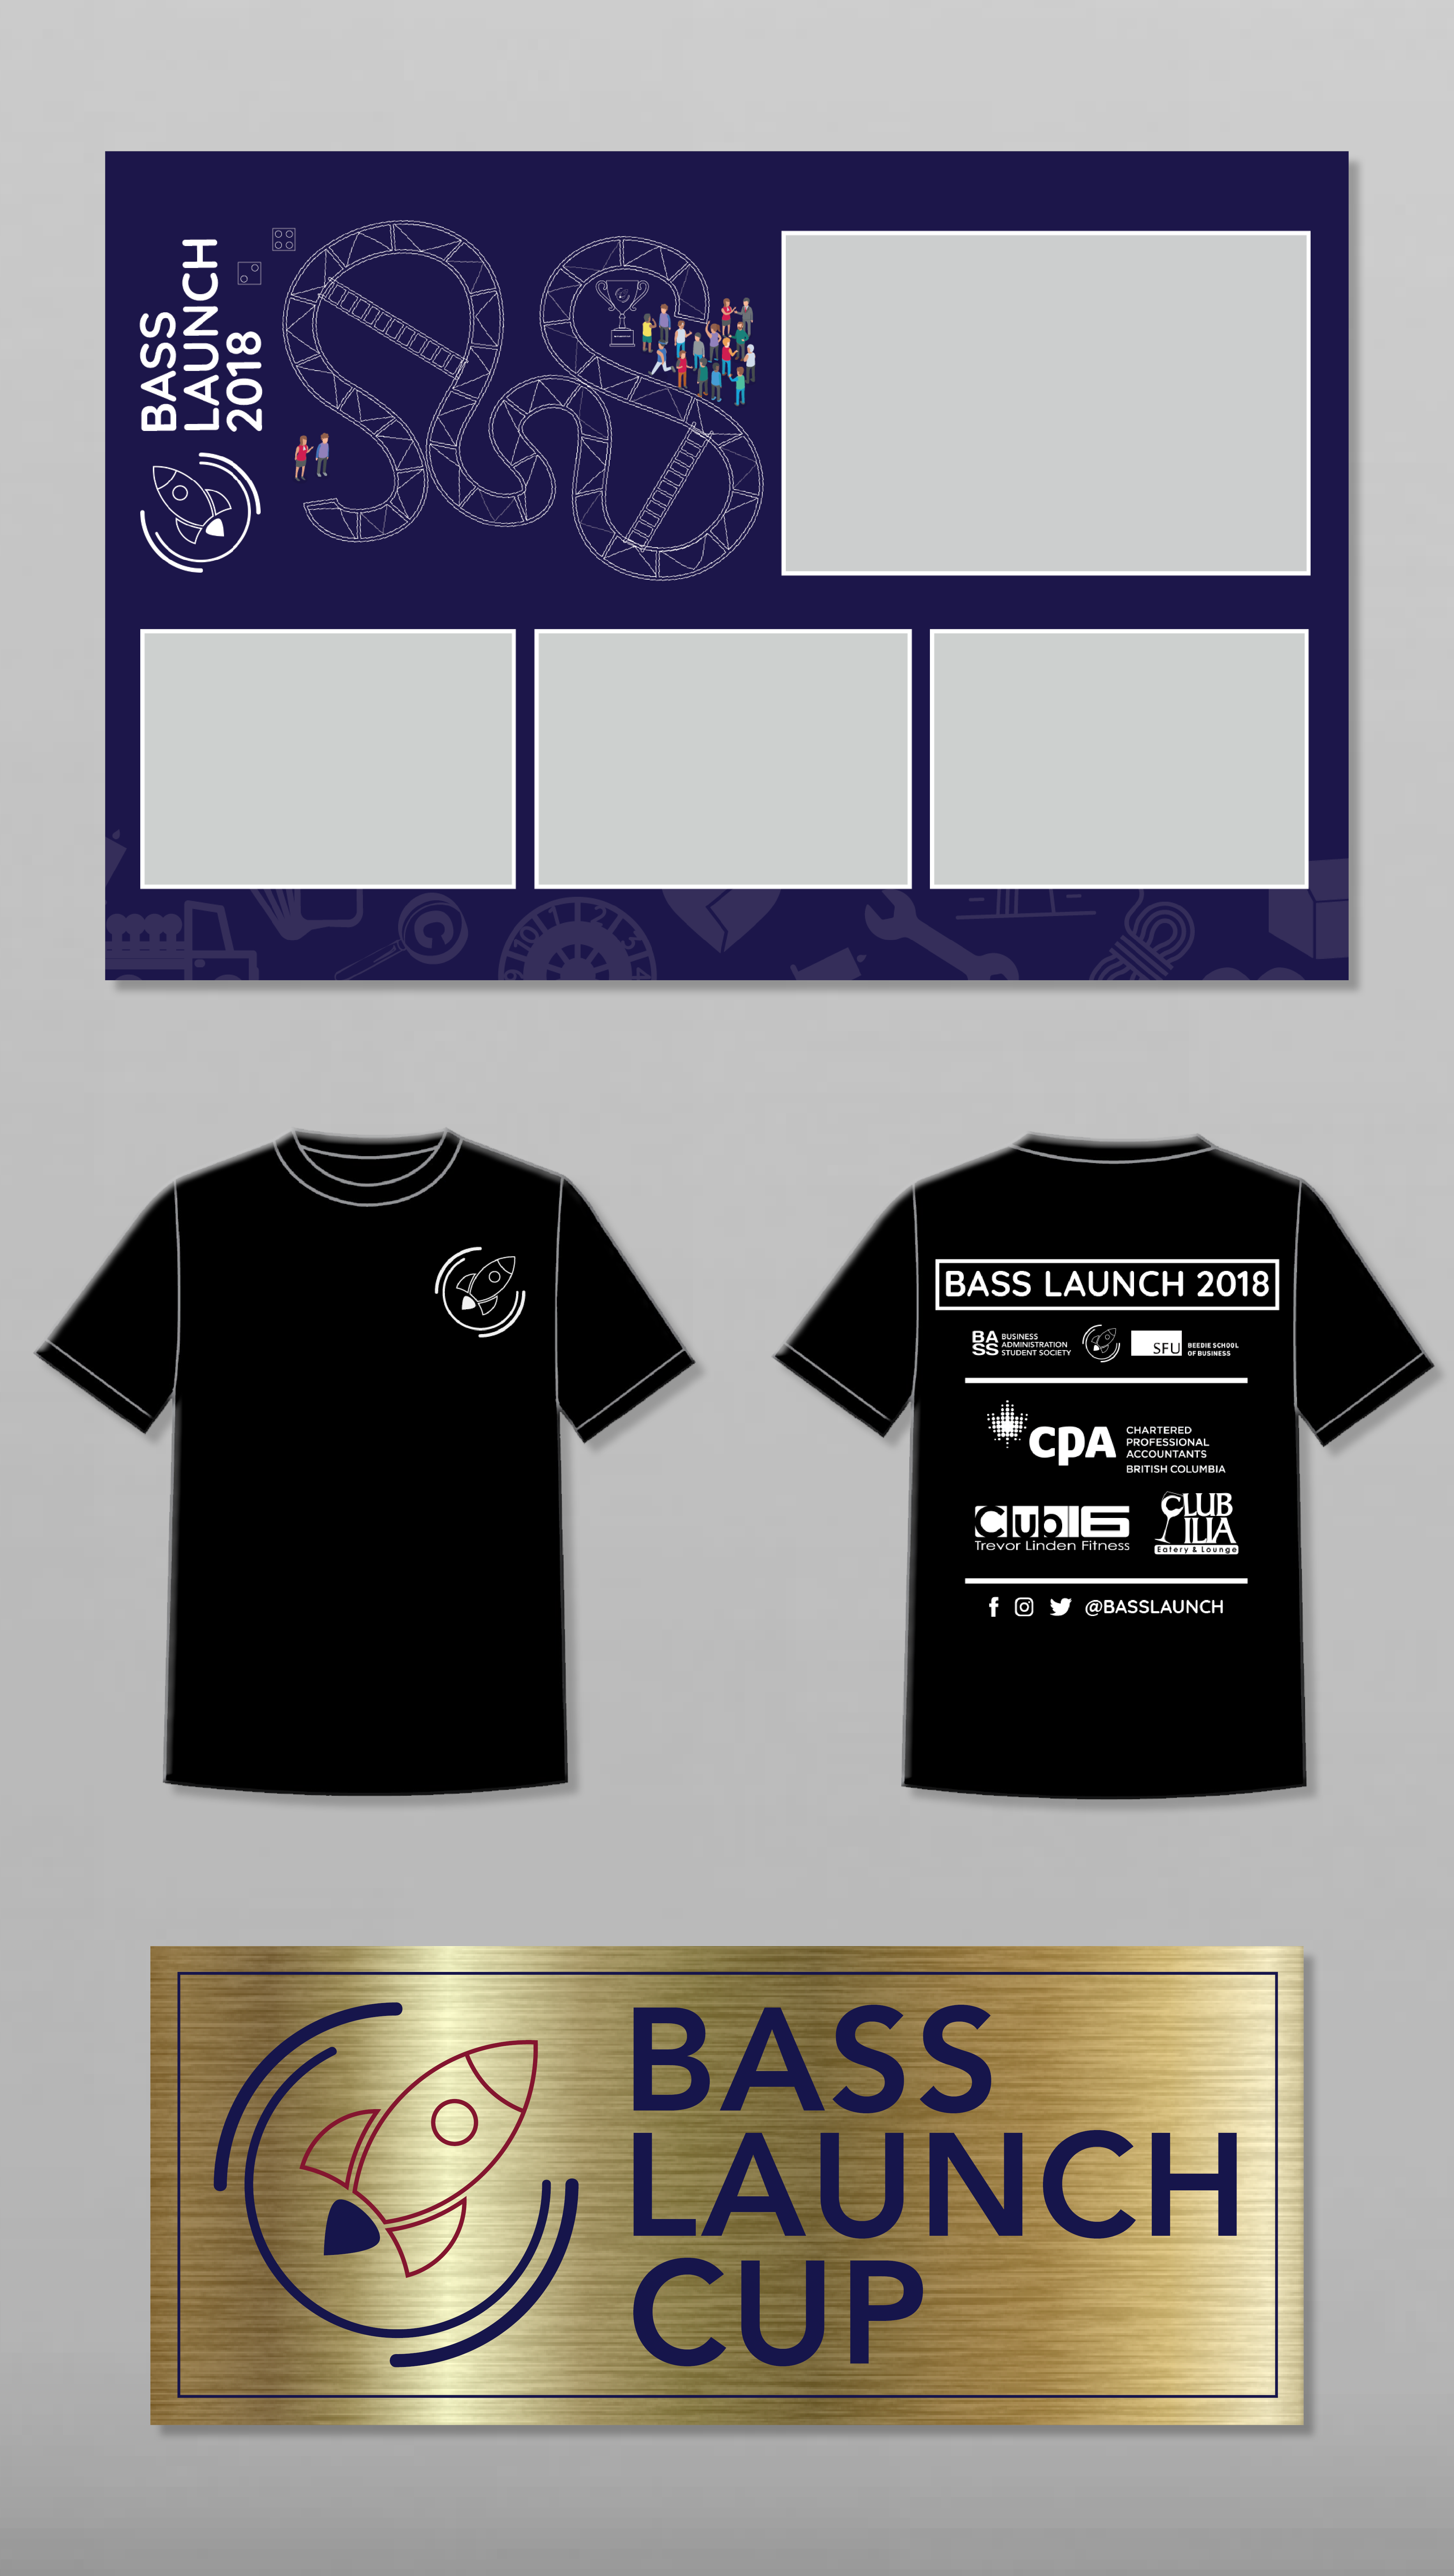 BASS LAUNCH: Products - Photobooth Template, T-shirts and Troph Plaque